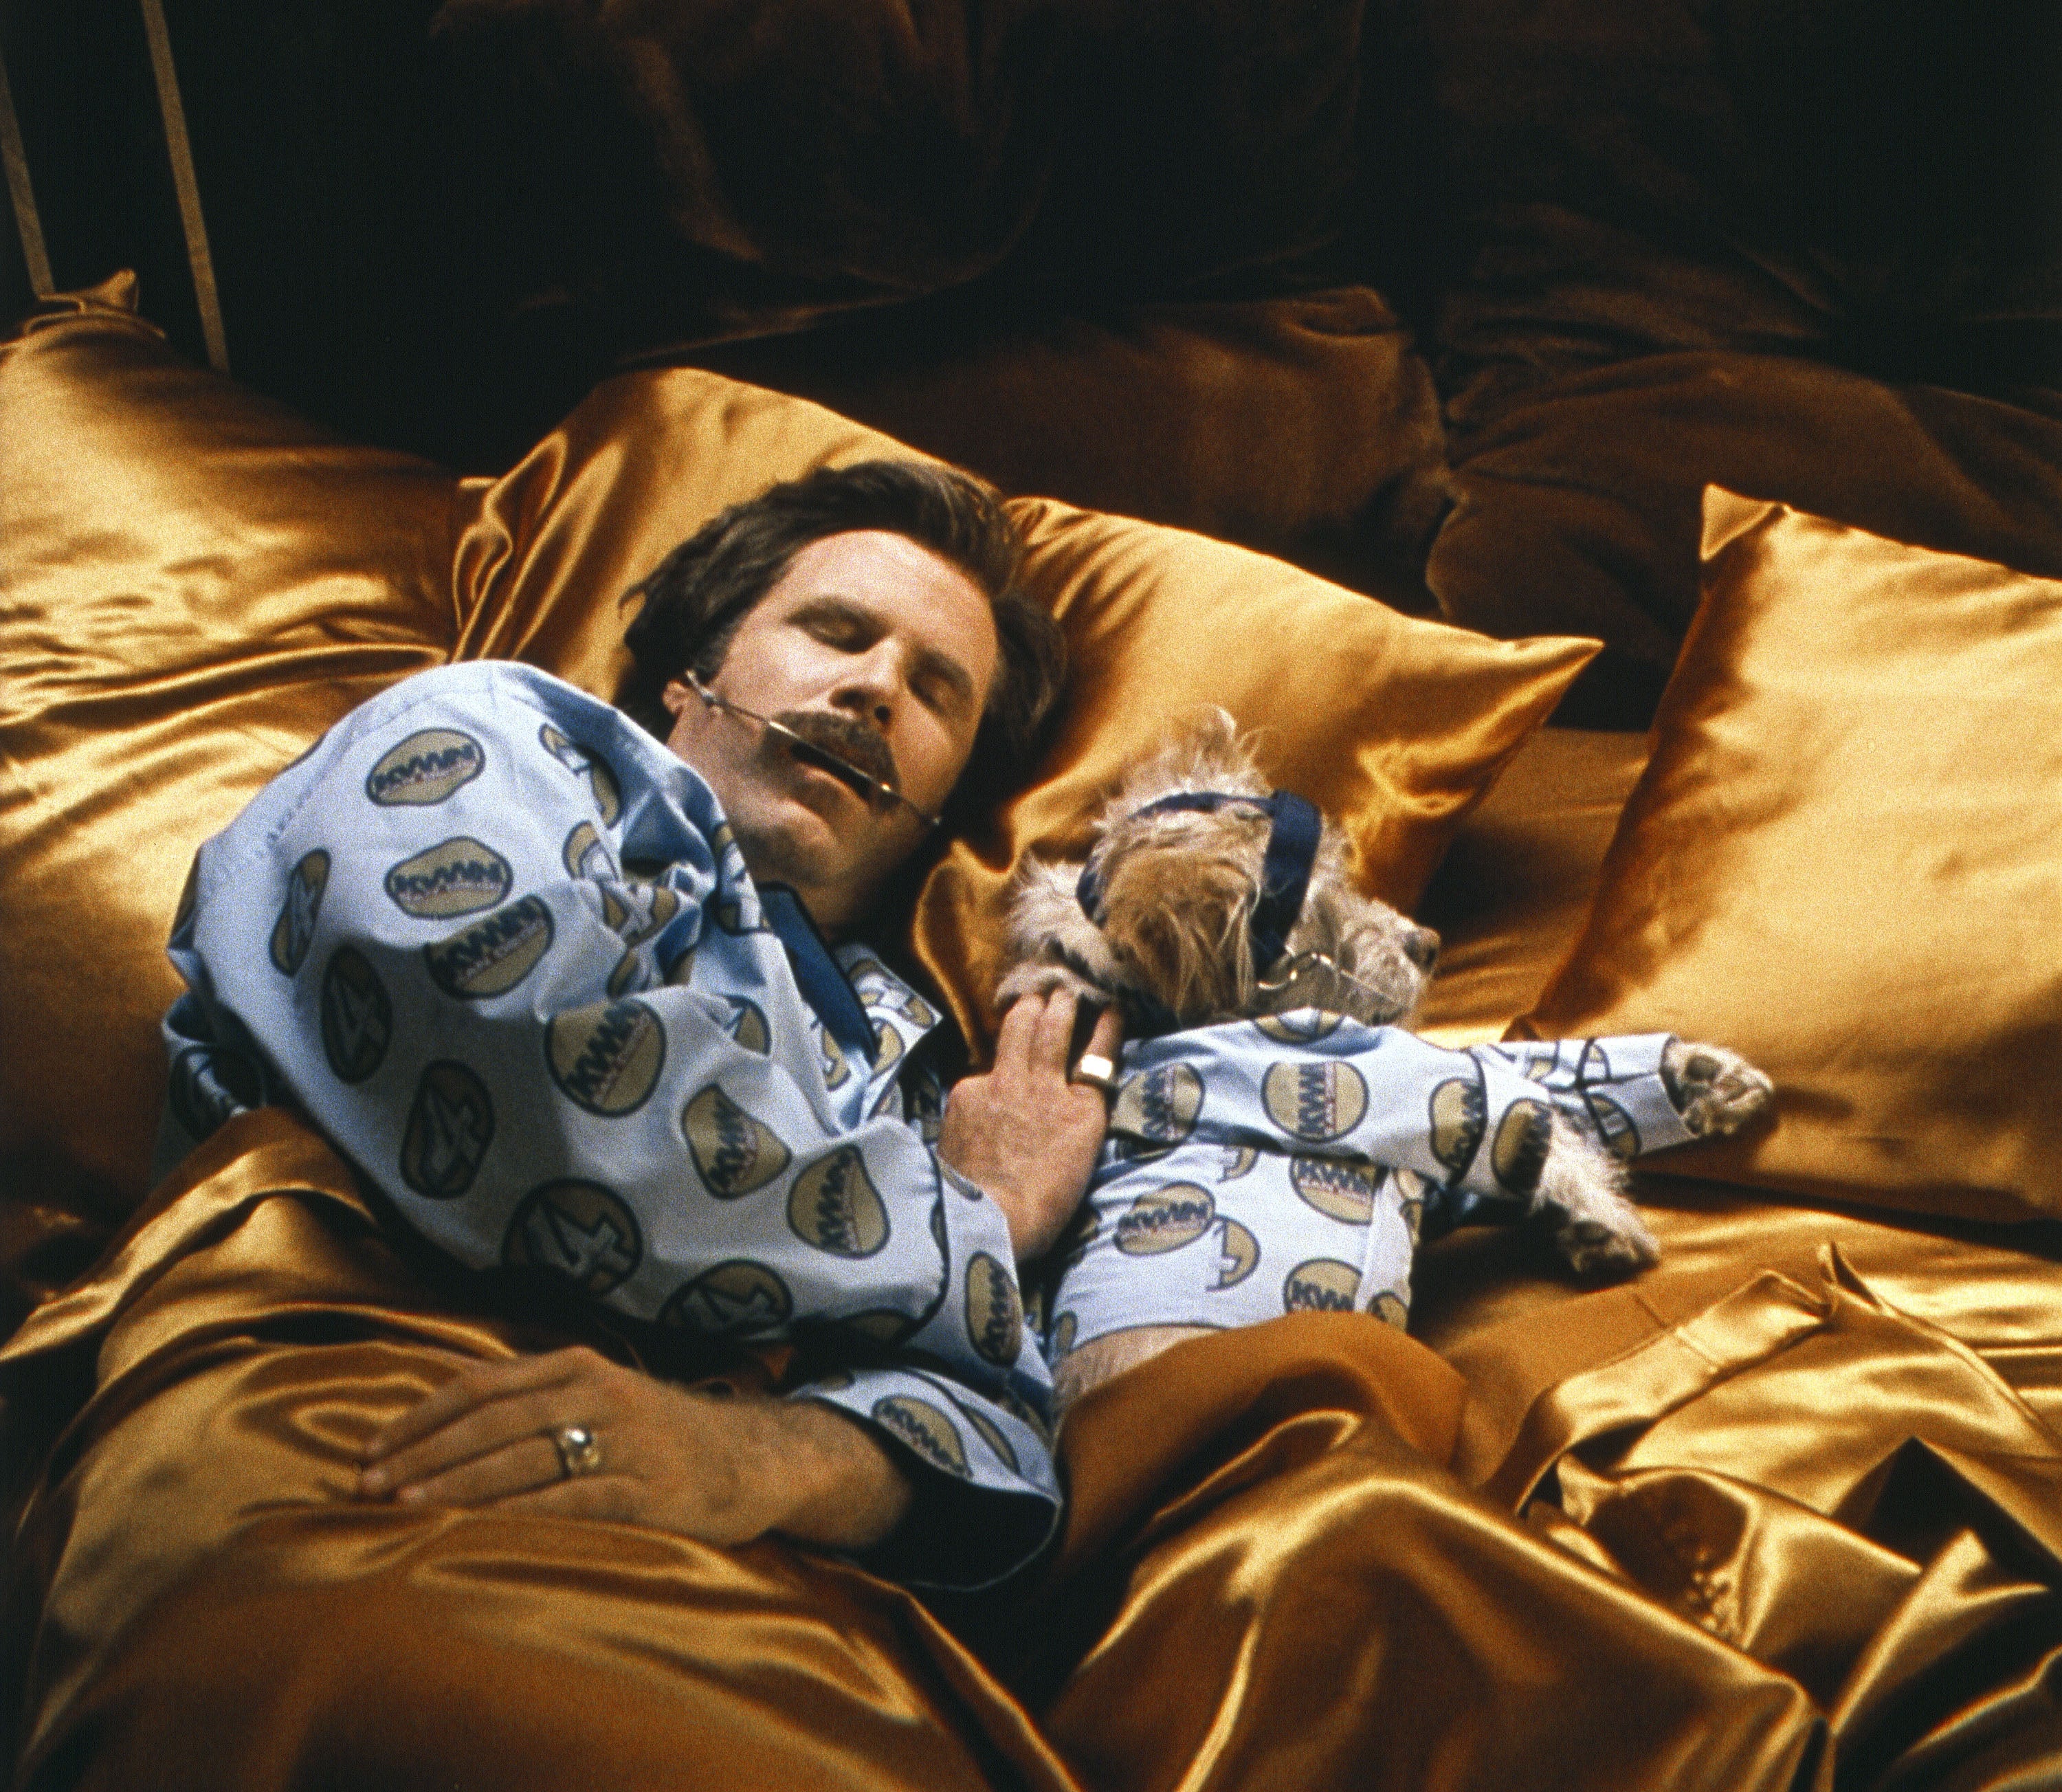 Ron Burgundy (Will Ferrell) and his sidekick Baxter (Peanut) wearig matching pyjamas in ‘Anchorman: The Legend of Ron Burgundy’ in 2004